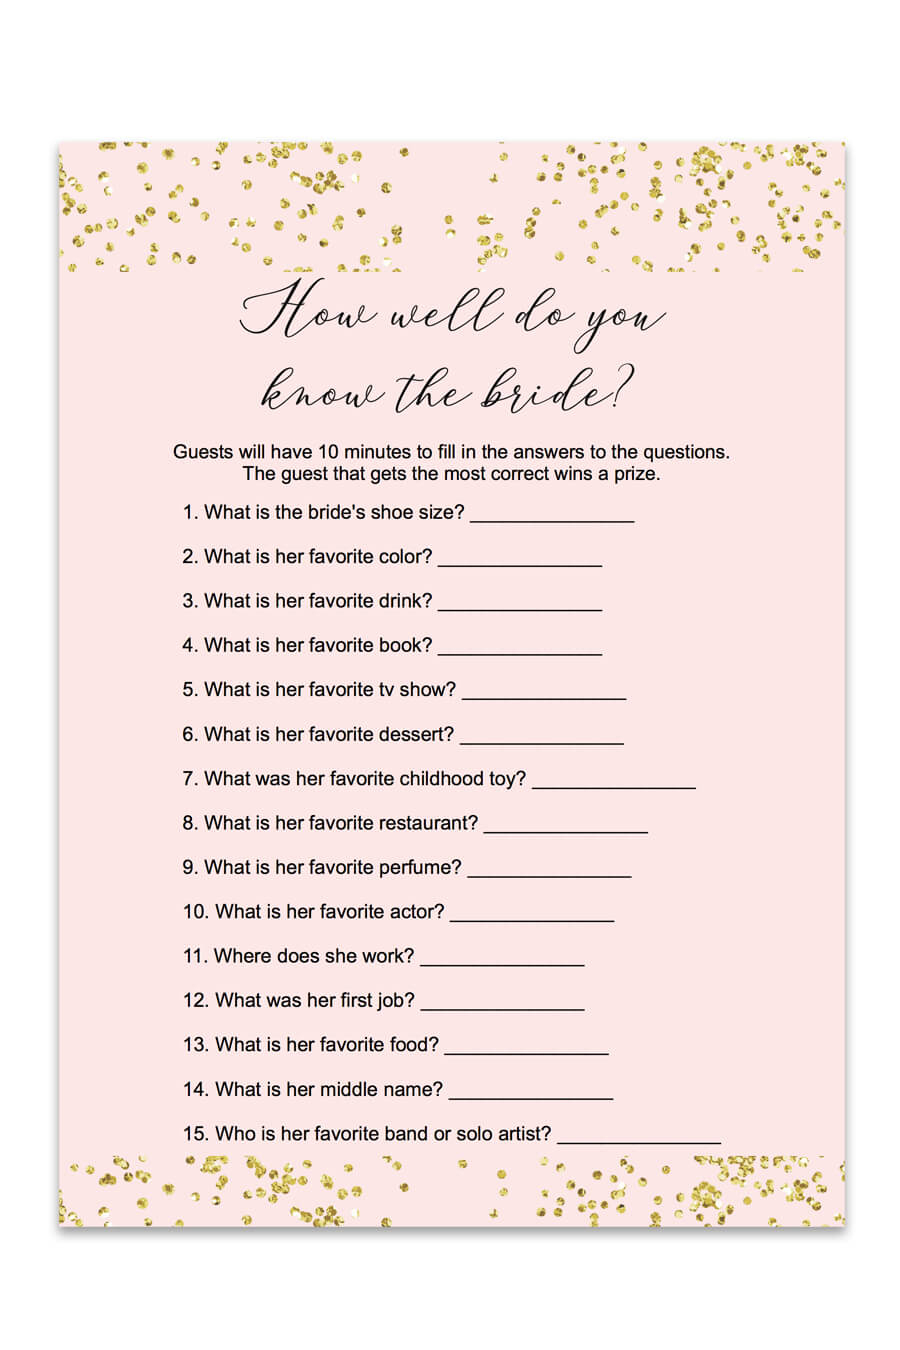 Blush And Confetti How Well Do You Know The Bride Game - Chicfetti - How Well Do You Know The Bride Game Free Printable